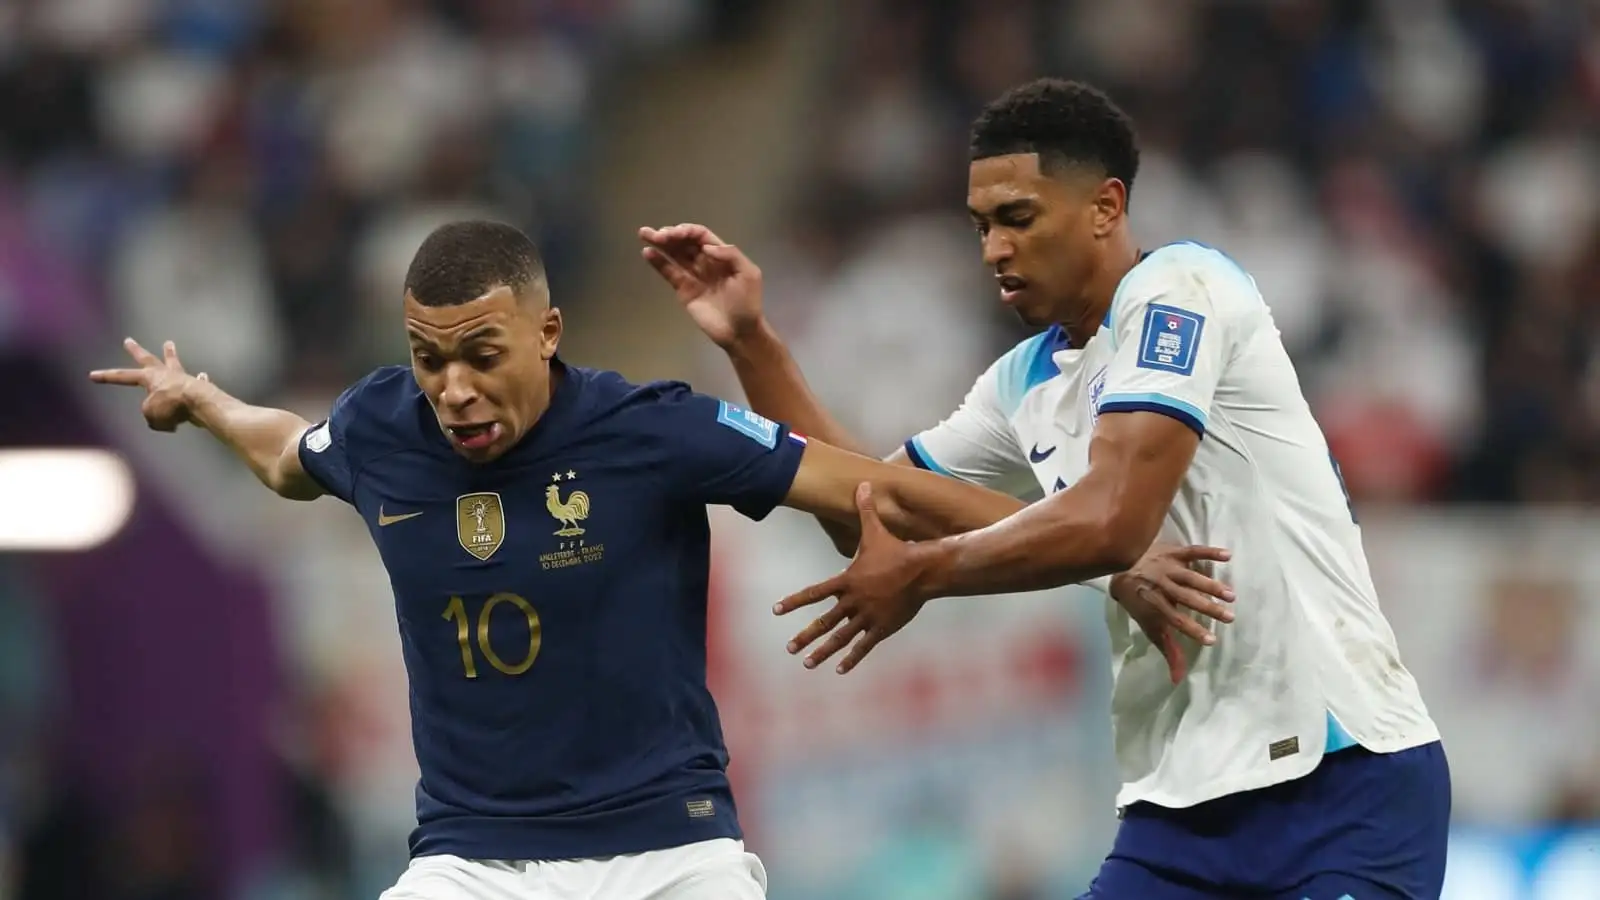 Kylian Mbappe and Jude Bellingham